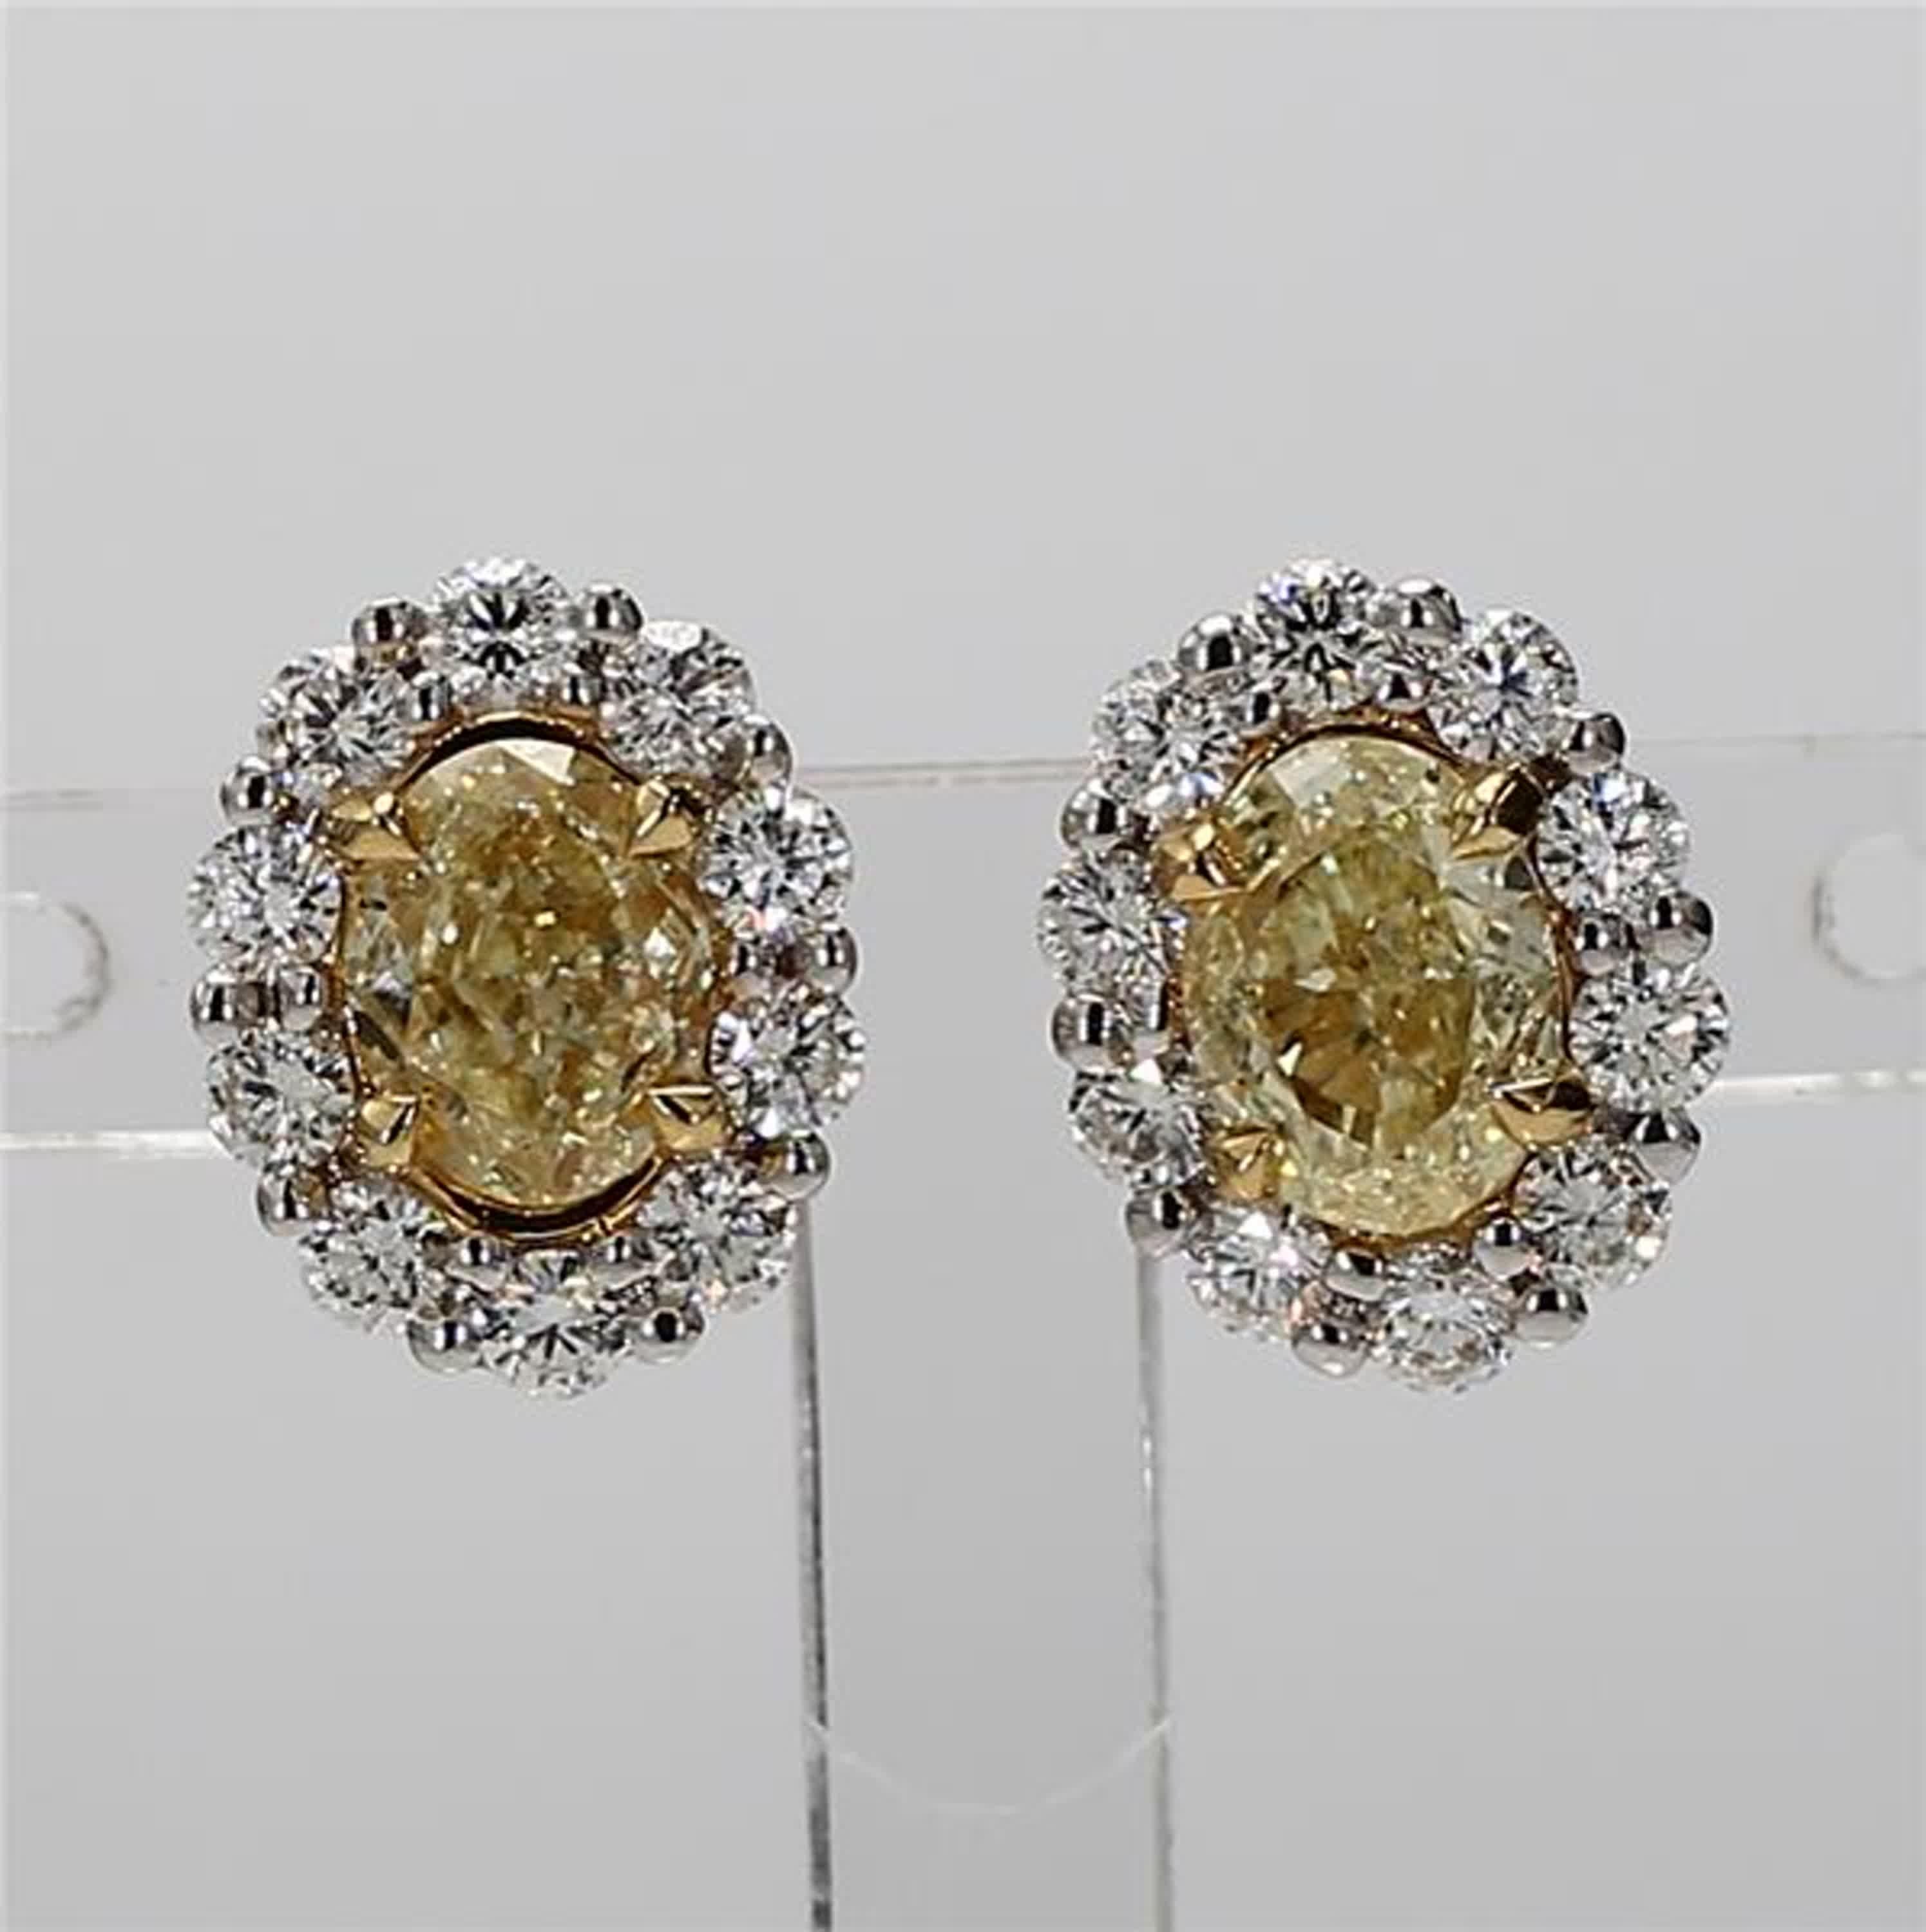 RareGemWorld's classic diamond earrings. Mounted in a beautiful 18K Yellow and White Gold setting with natural oval cut yellow diamonds. The yellow diamonds are surrounded by a halo of small round natural white diamond melee. These earrings are